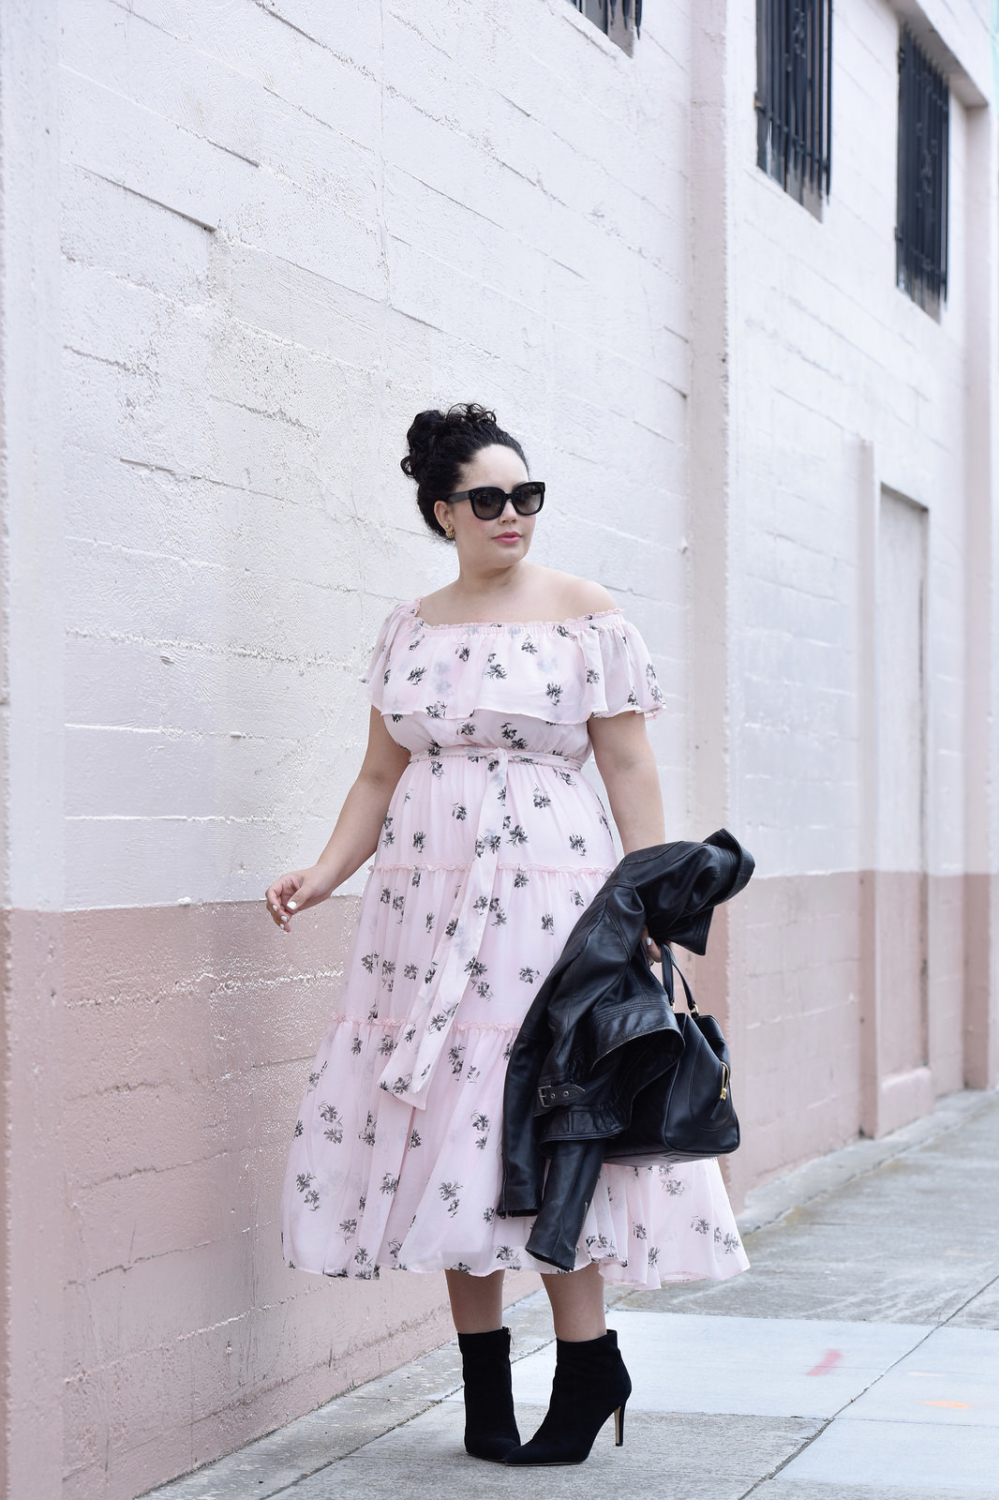 An Easy Way to Make a Floral Dress More Interesting | Girl With Curves